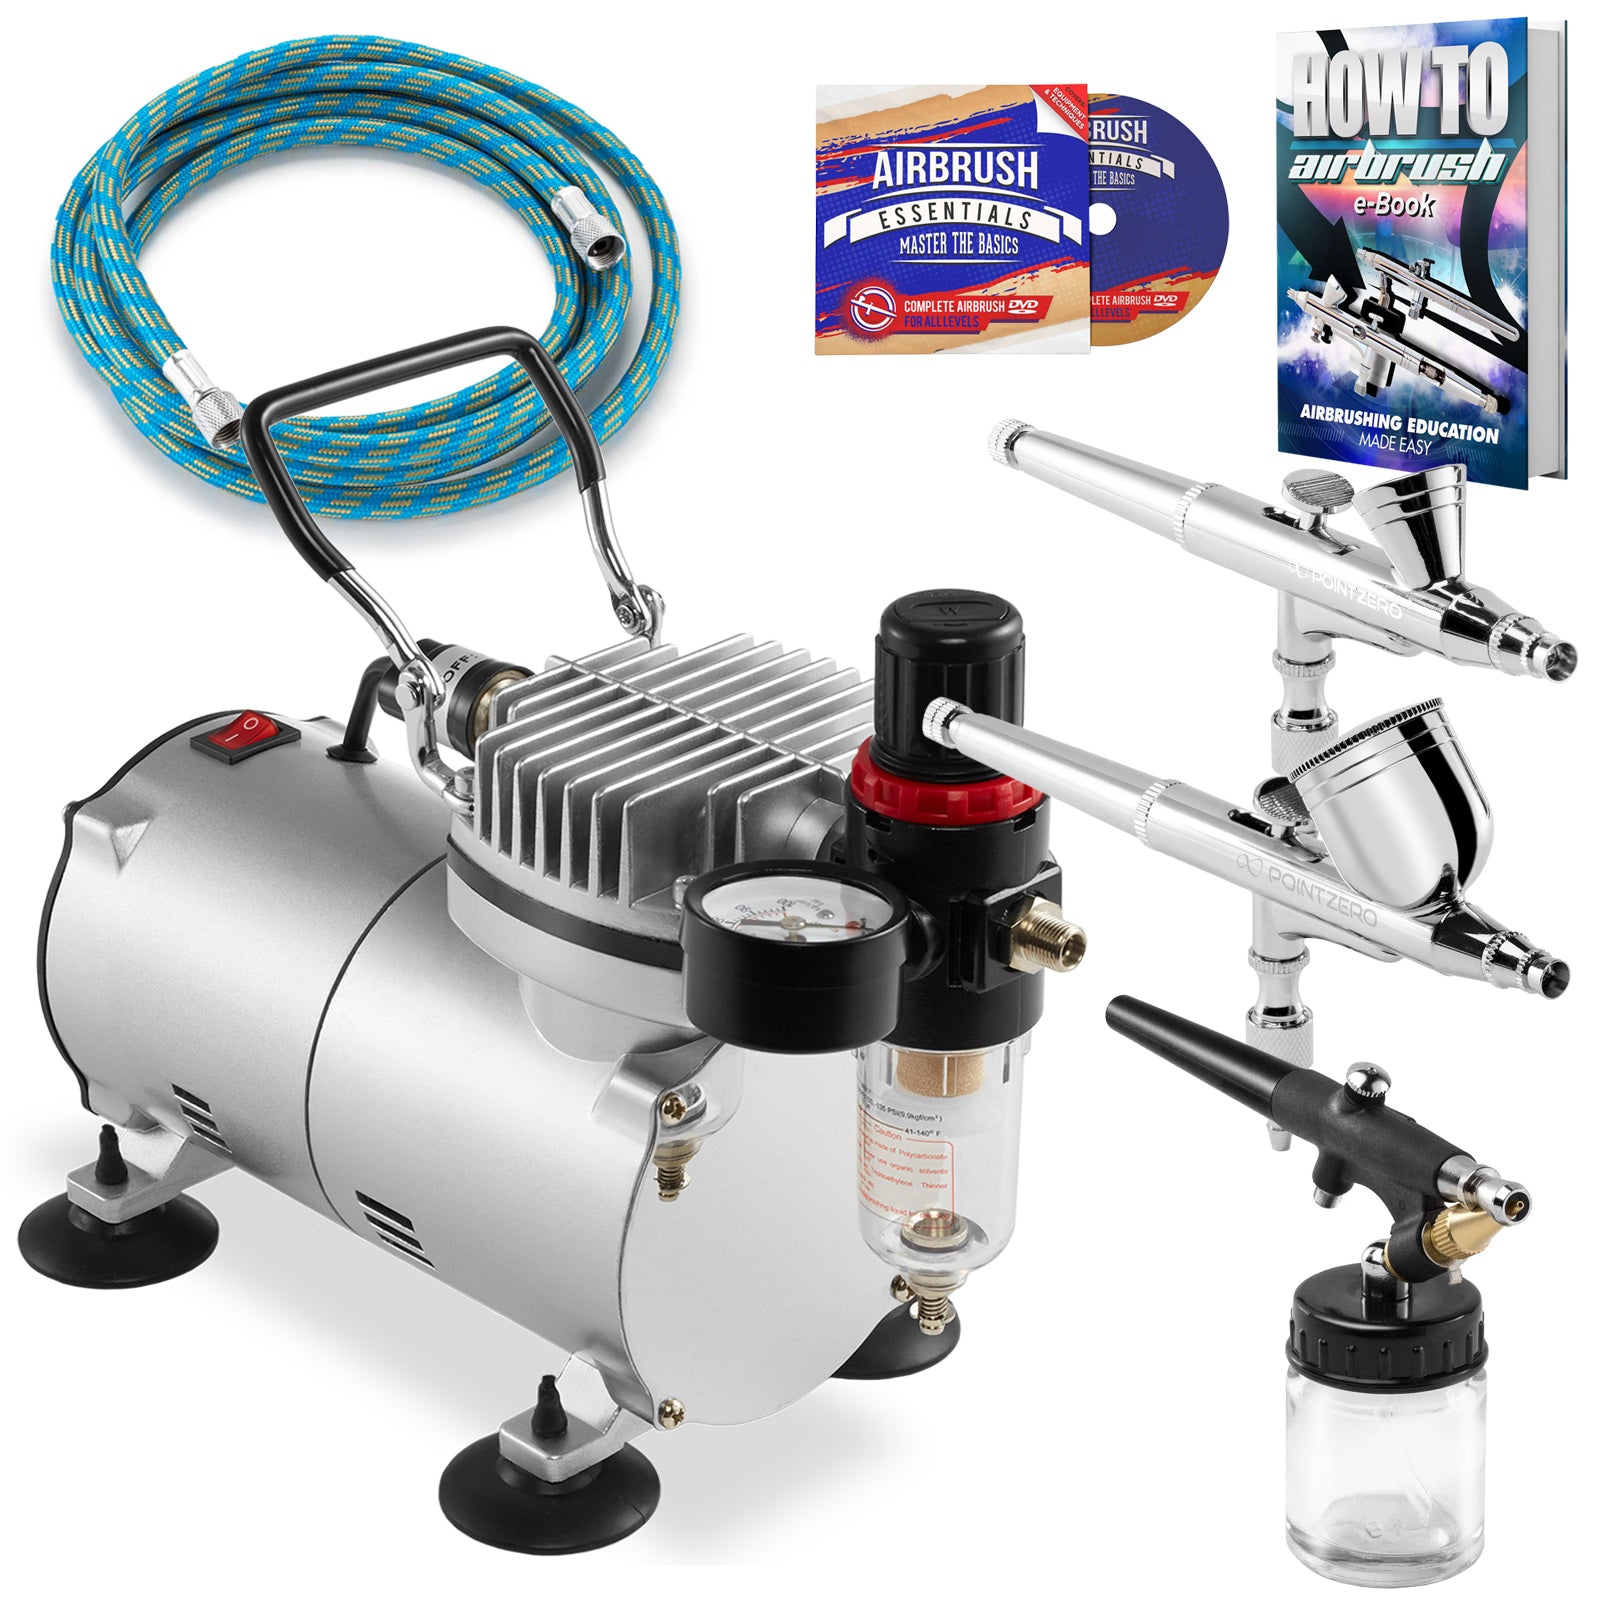 Dual Action Airbrush Compressor Kit w/ Spray Booth Portable Hobby Paint  Booth - Helia Beer Co